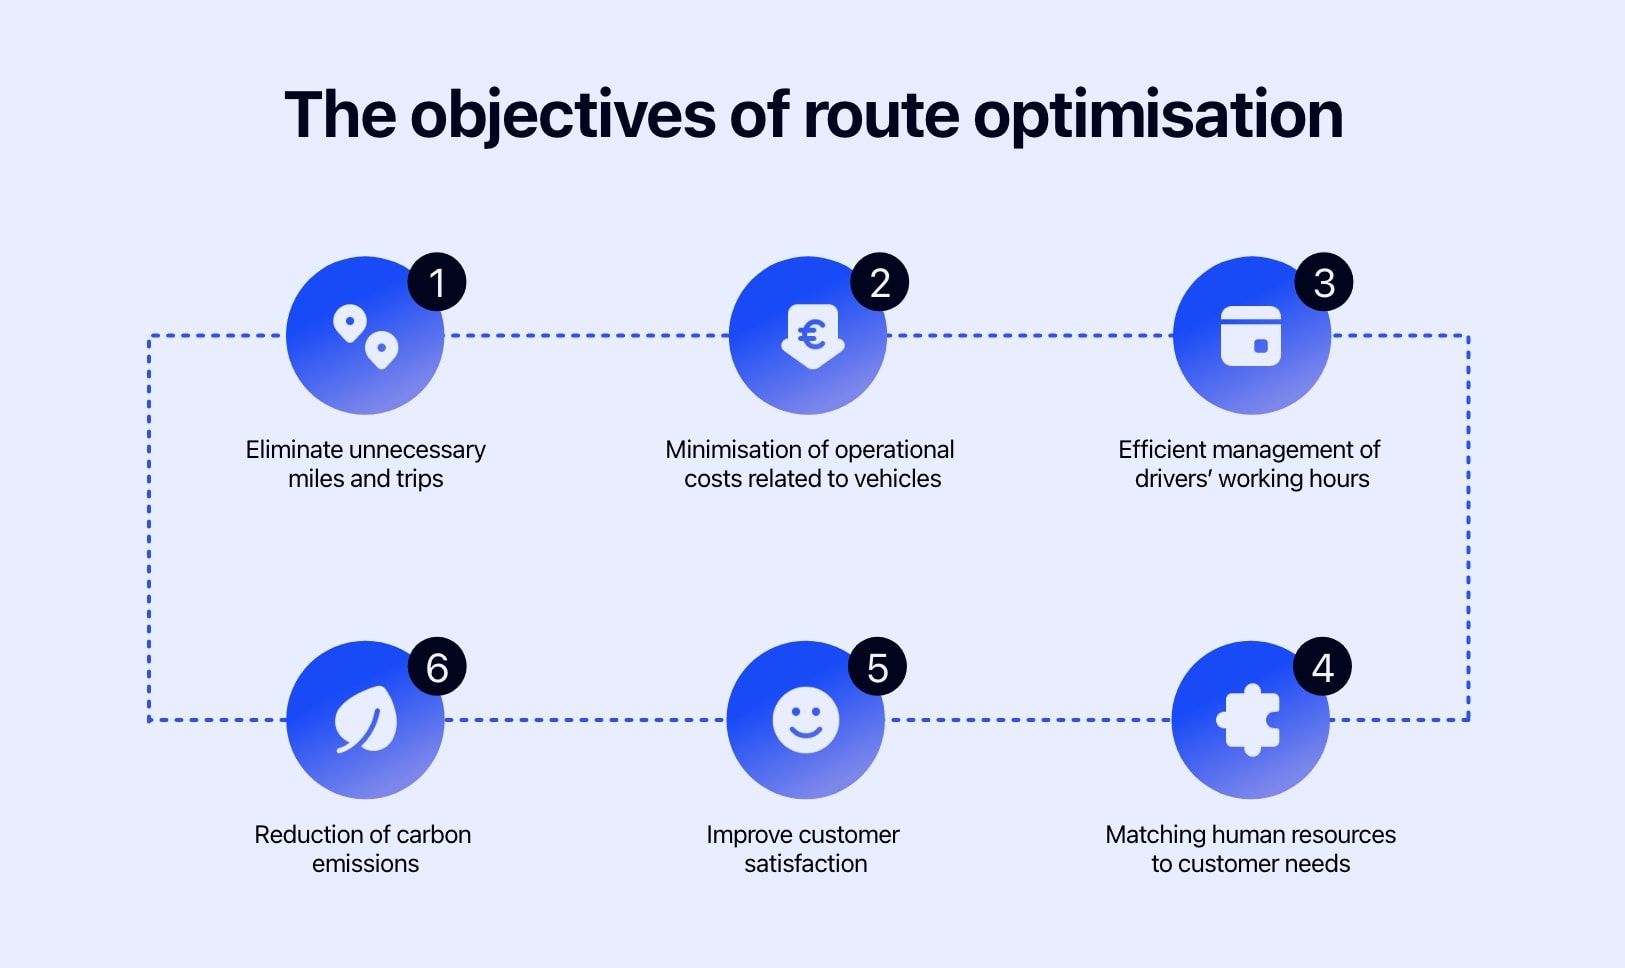 Diagram showing the objectives of route optimisation.